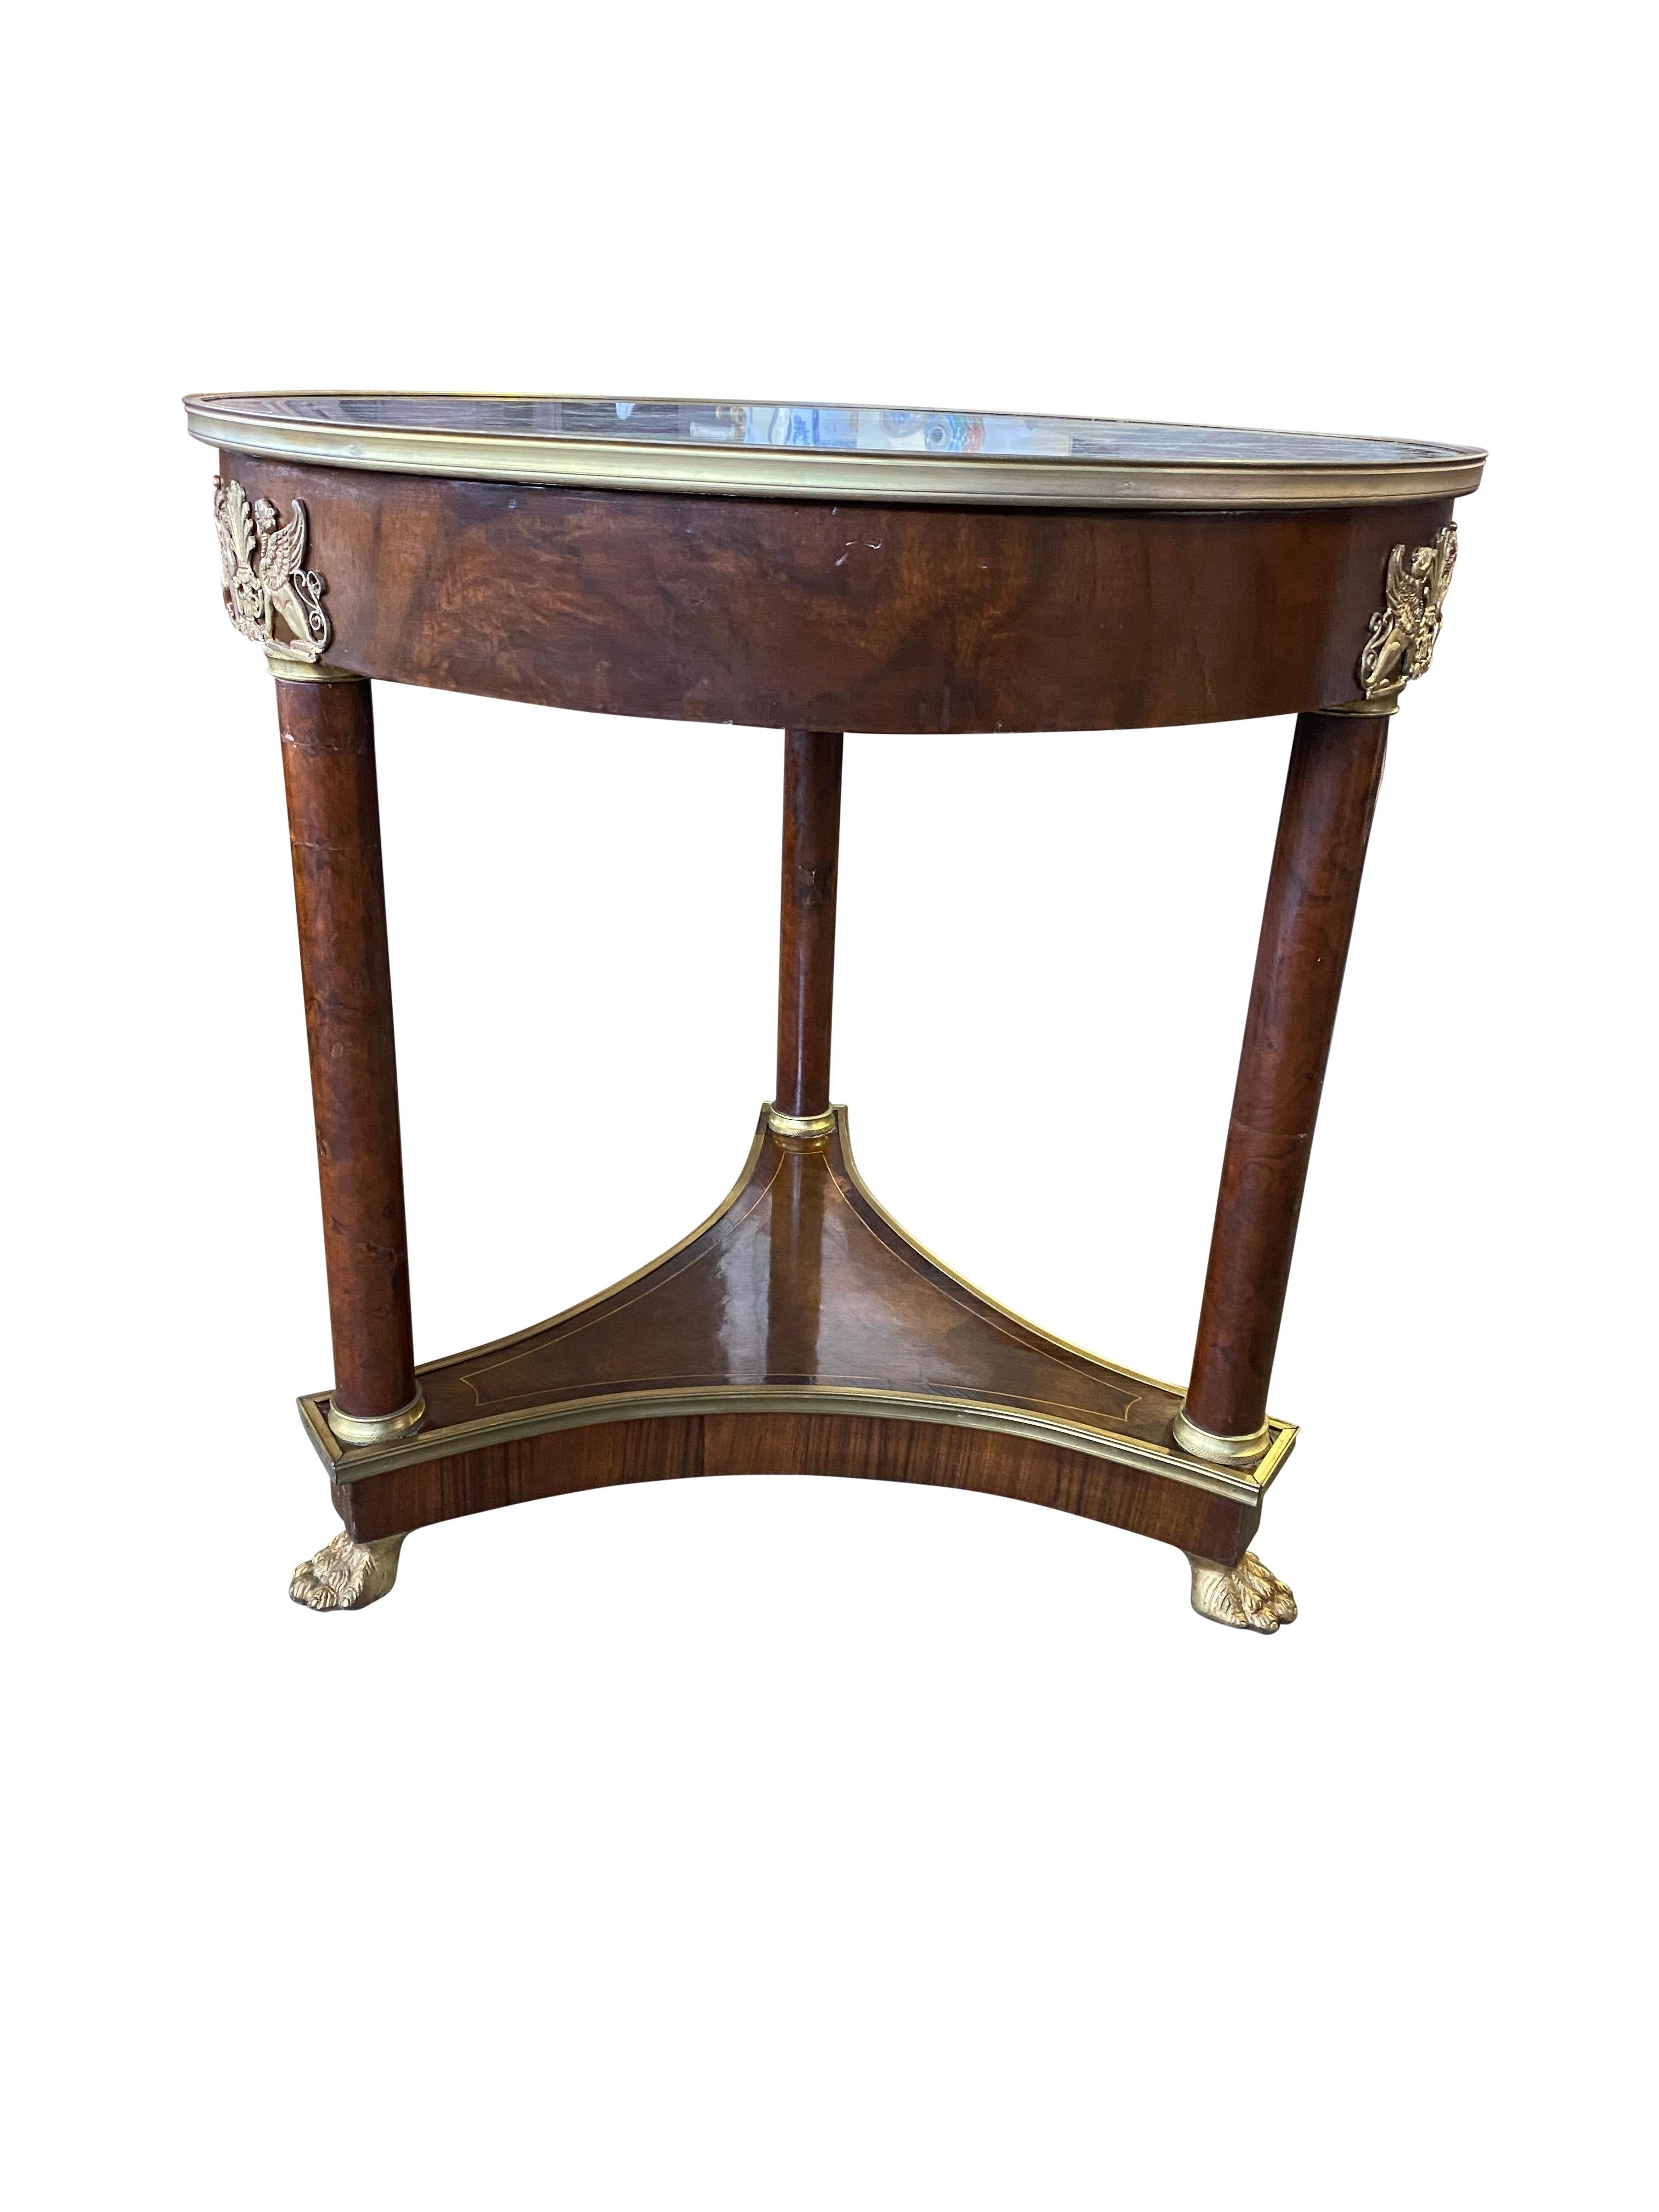 French Empire Round Marble Top Table, 19th Century For Sale 4